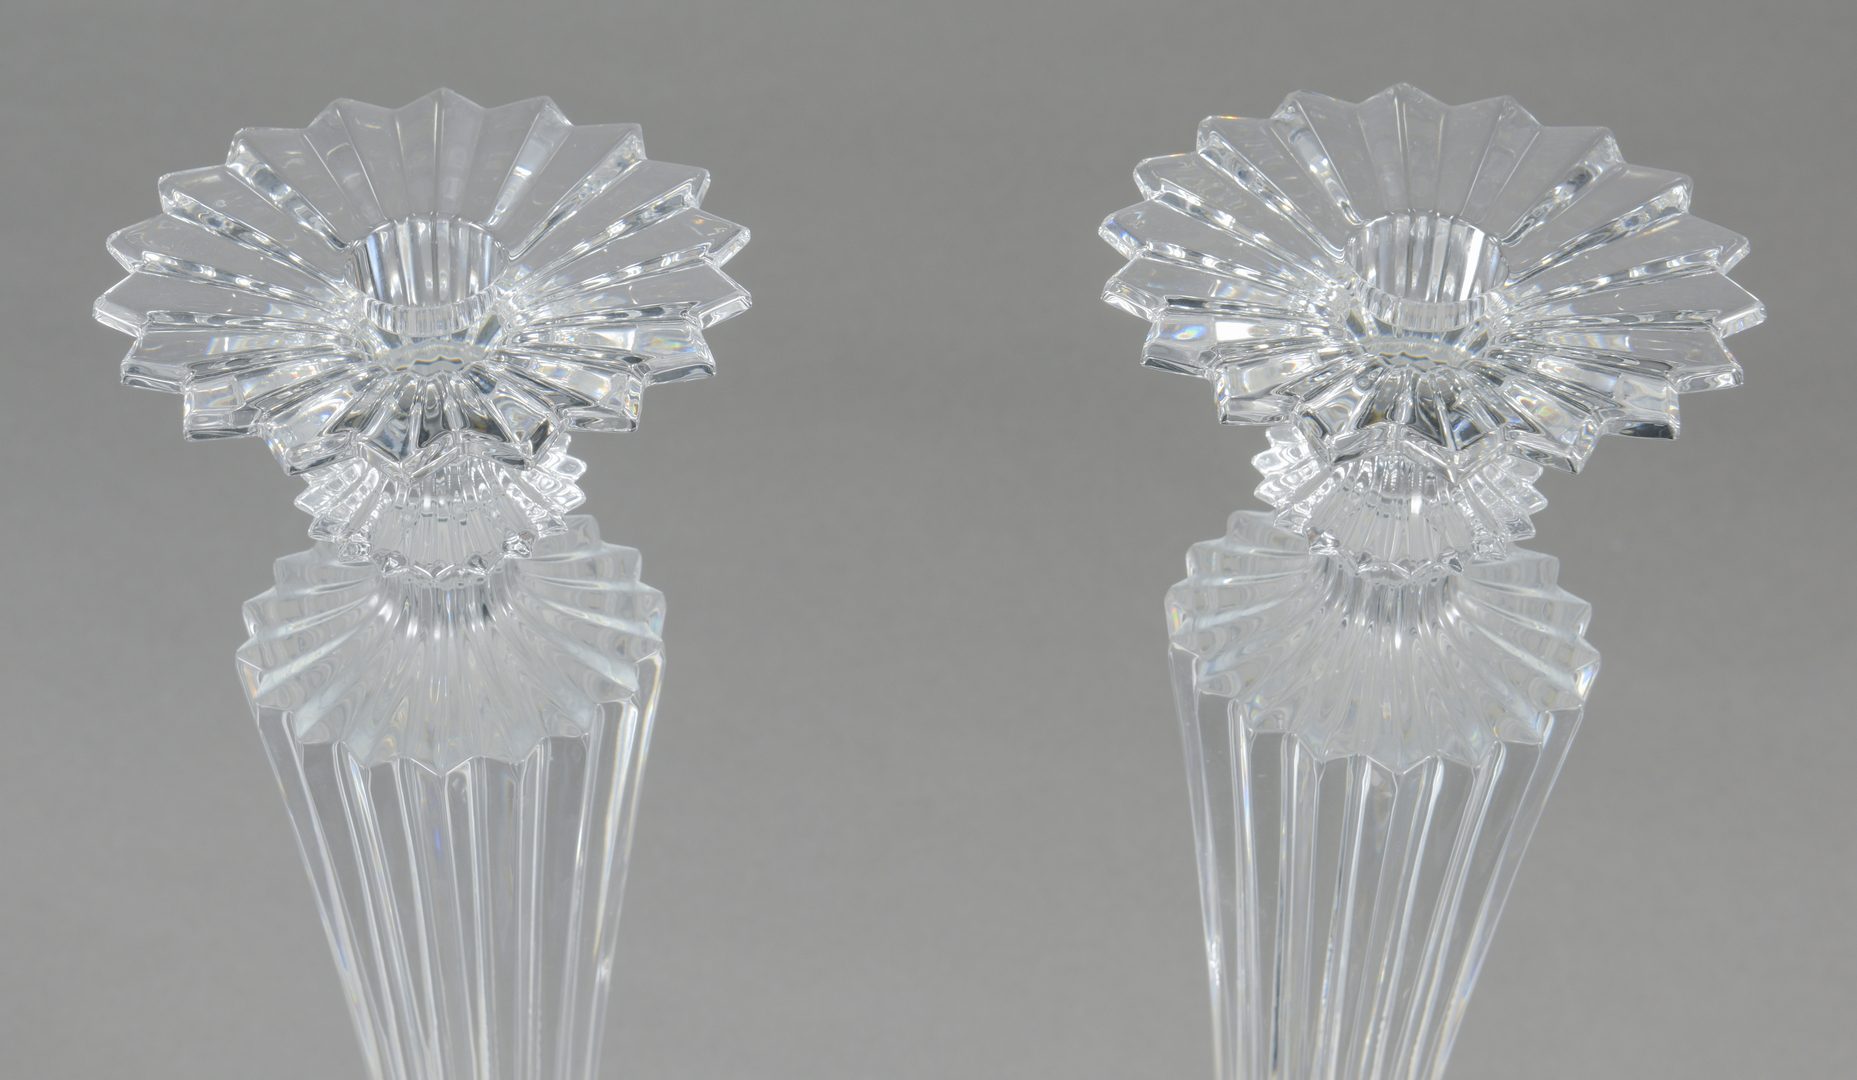 Lot 694: Pair of Baccarat Mille Nuit Candlesticks